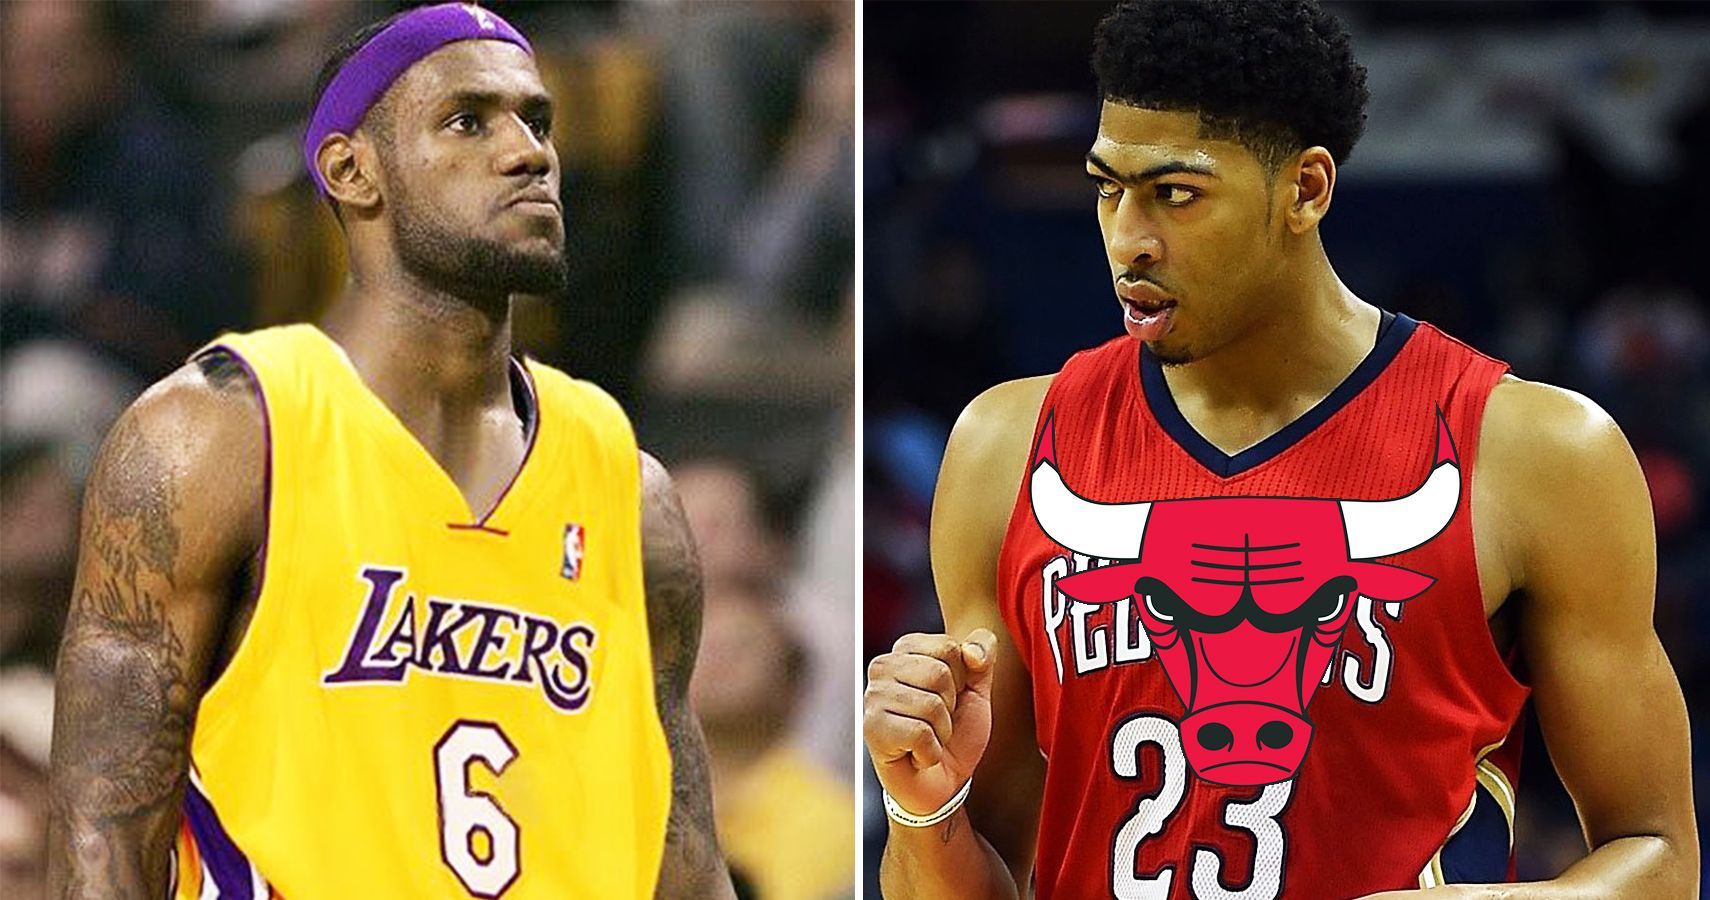 Projecting A New Team These 15 NBA Players Will Join Before Their